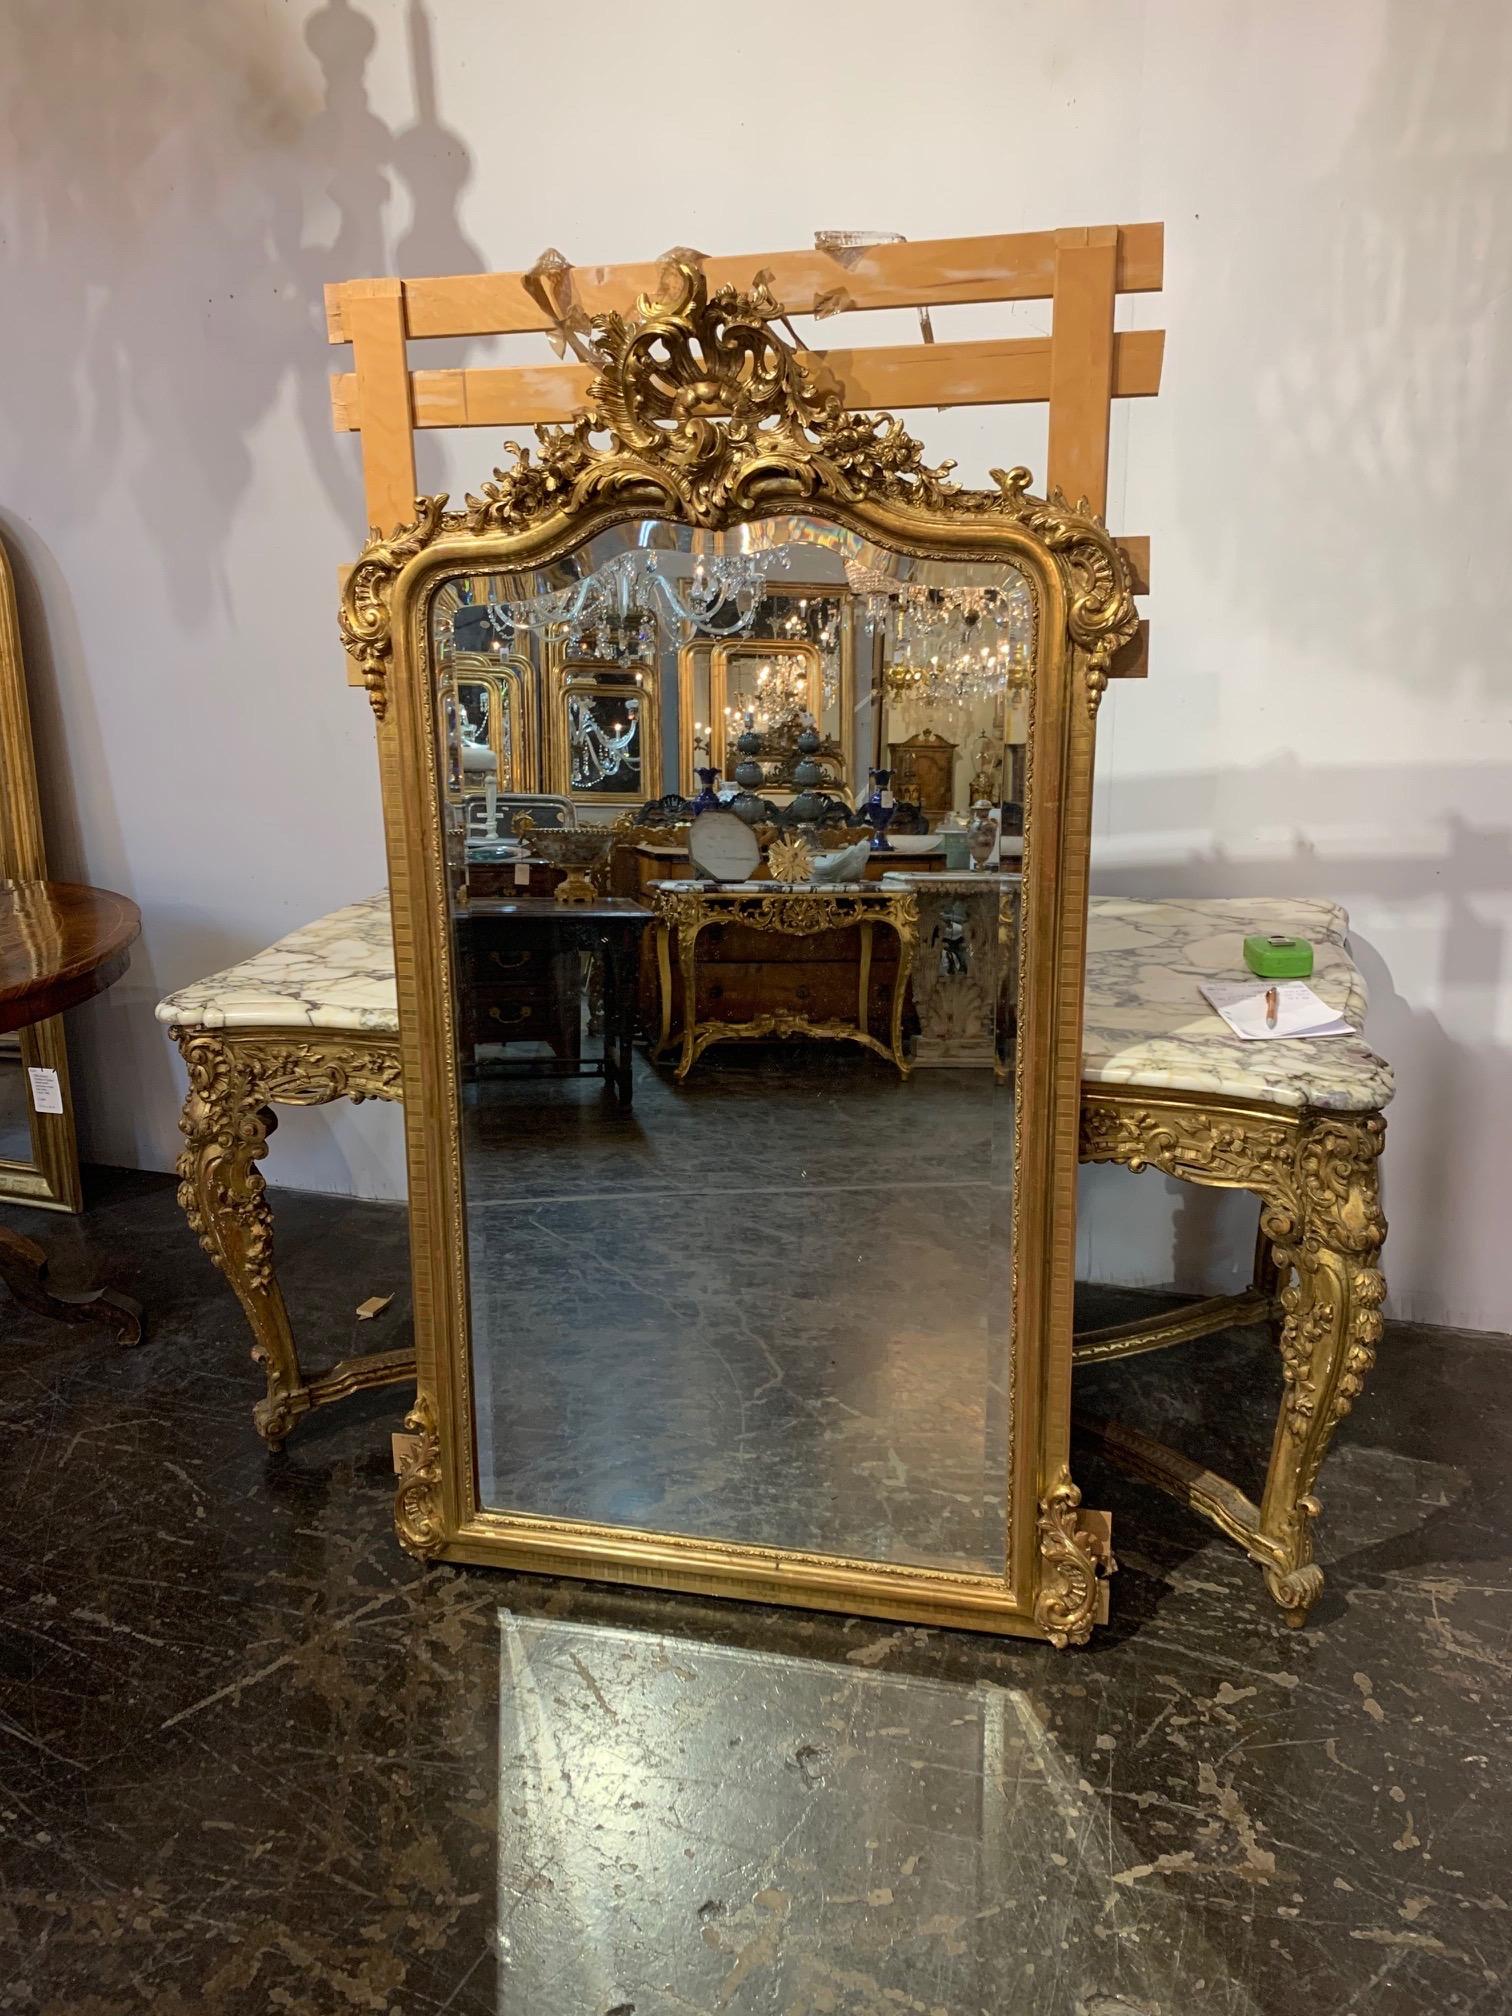 Lovely 19th century French Louis XV carved and giltwood mirror. Beautifully carved crest along with an exceptional gilt finish. A fabulous decorative mirror!